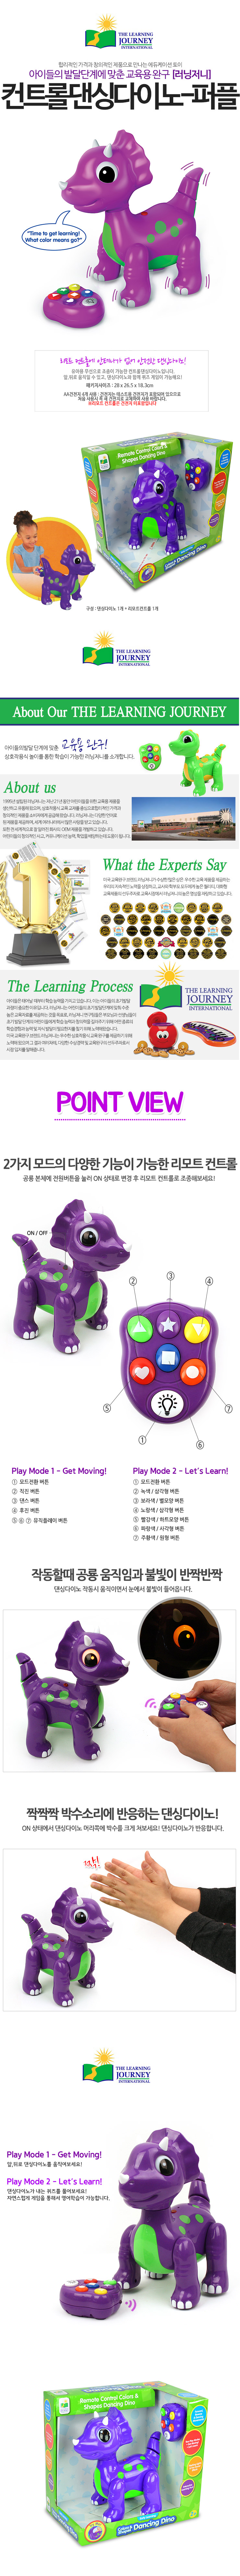 Colors_Shapes_Dino_Product.jpg